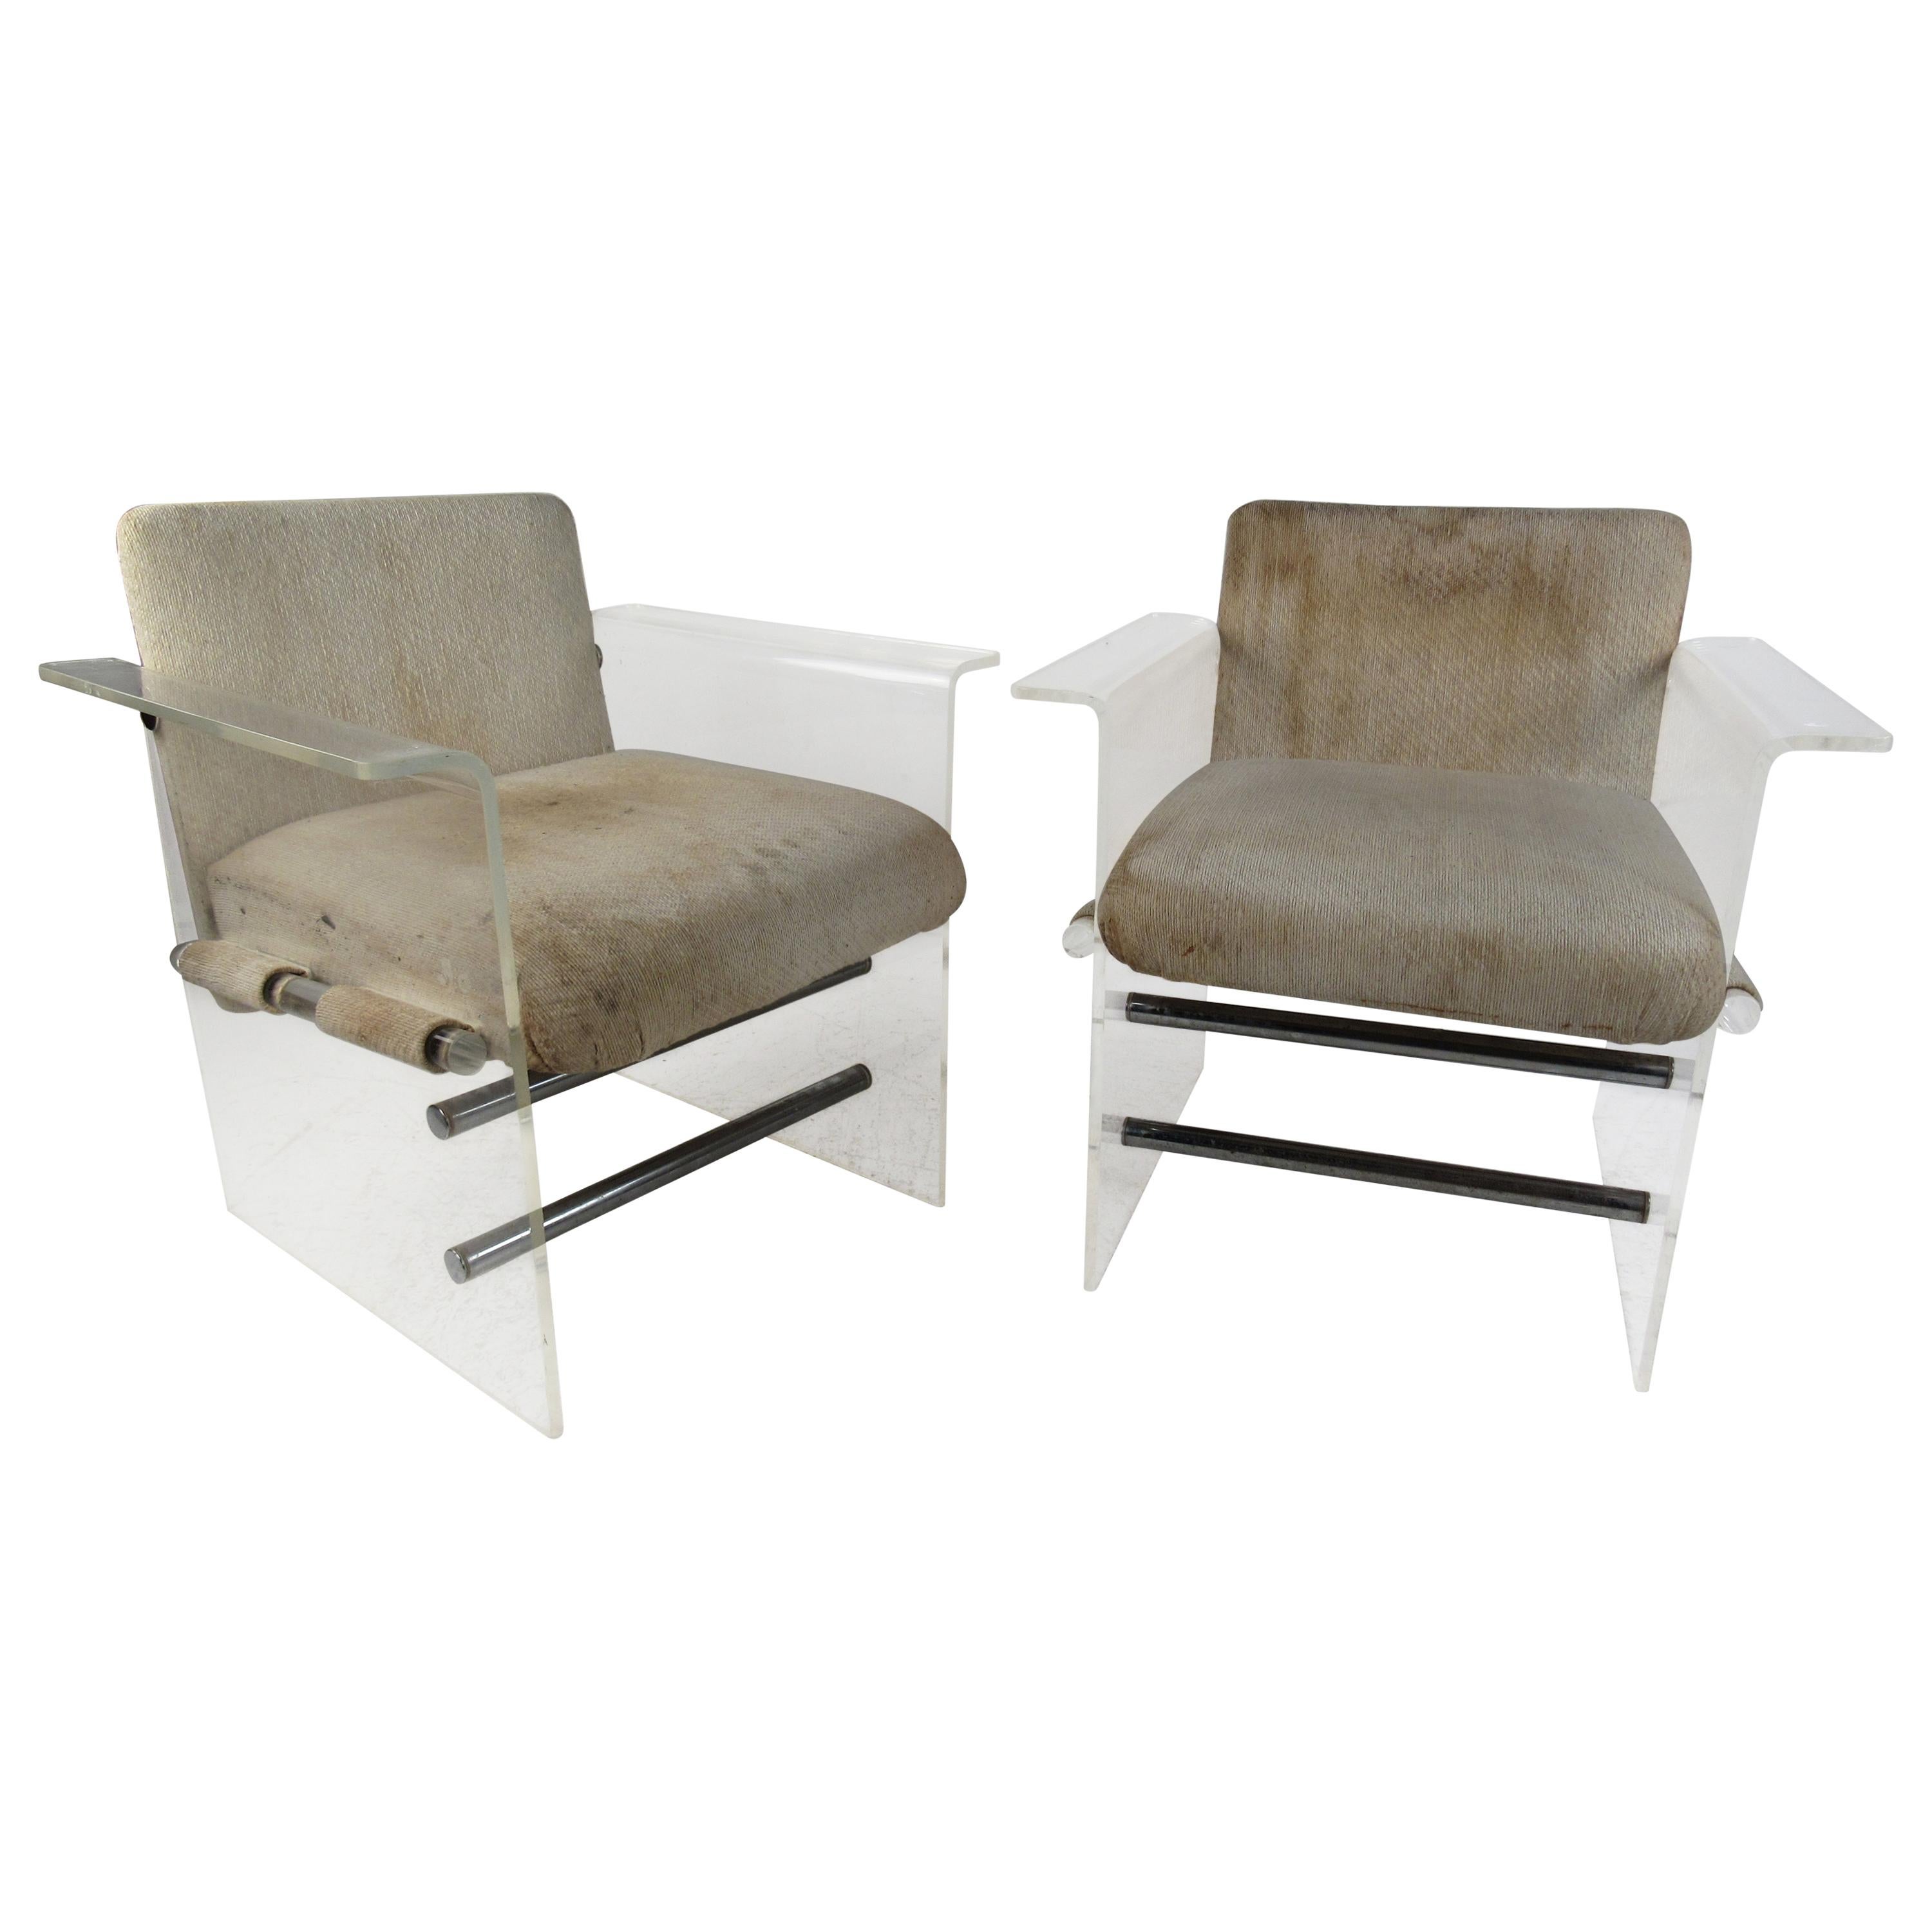 Pair of Mid-Century Modern Lucite Pace Style Lounge Chairs